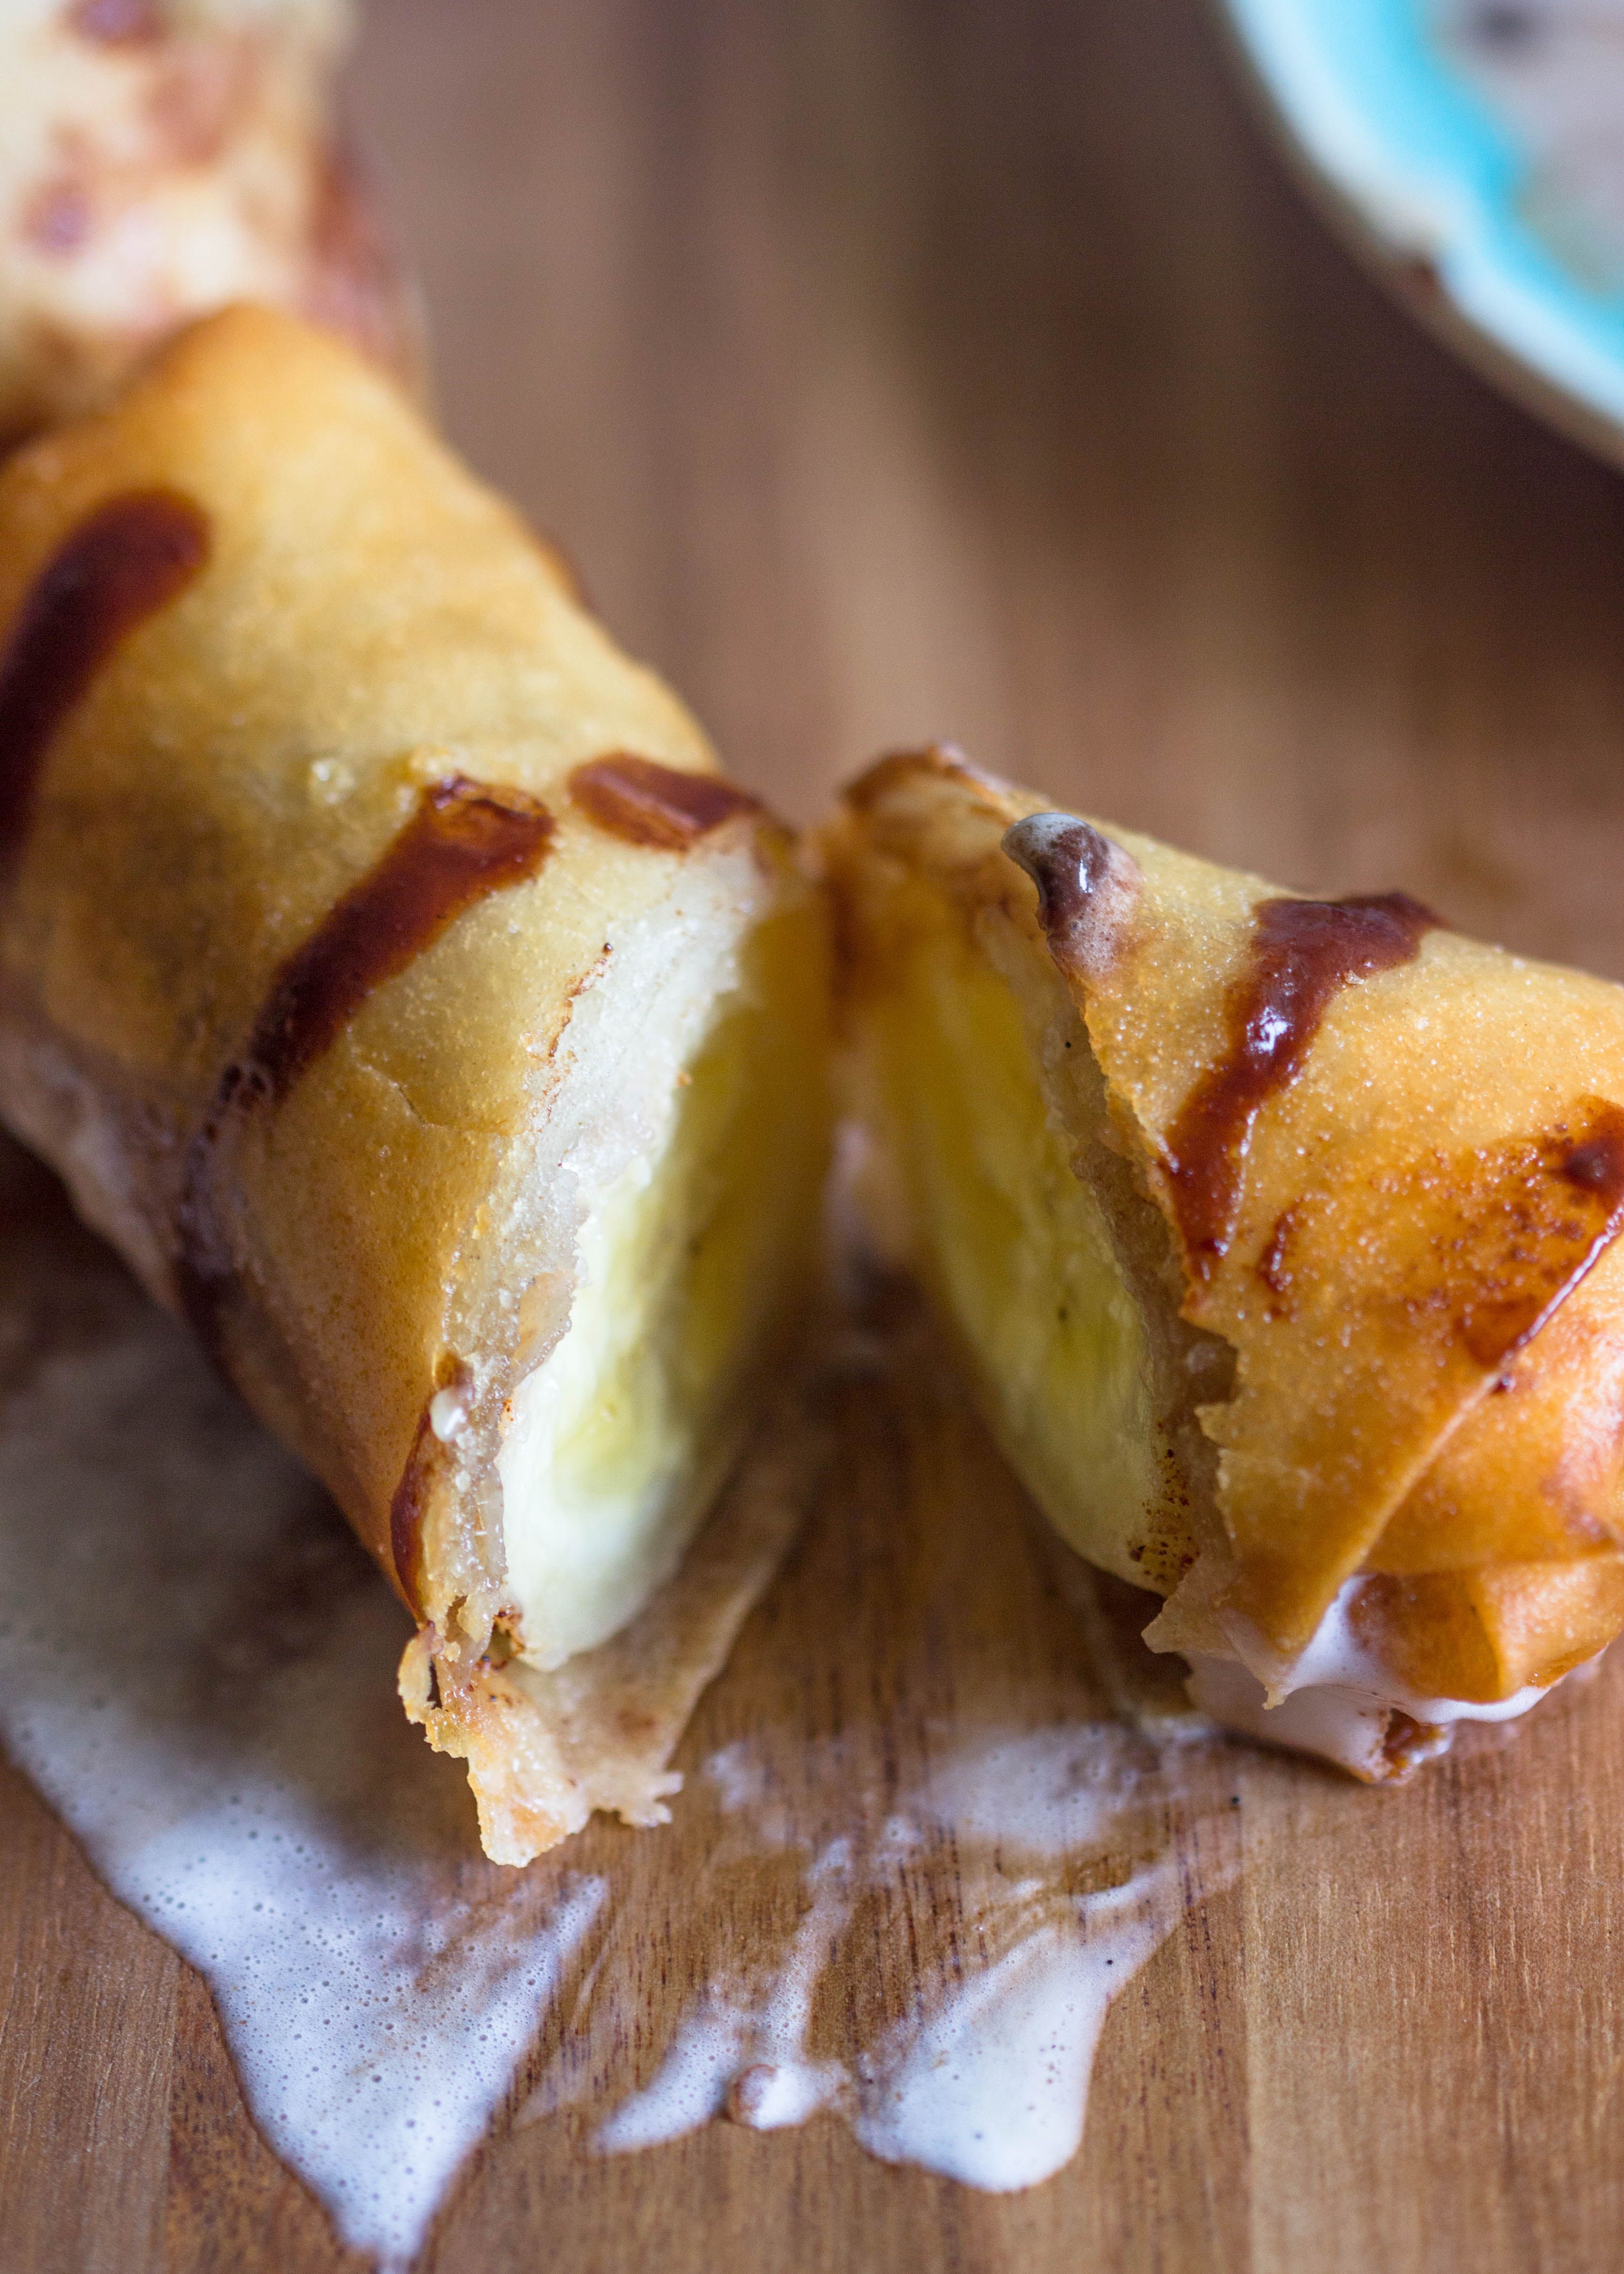 Banana Spring Rolls | Gimme Delicious Pertaining To Twisted Banana Roll (View 18 of 25)